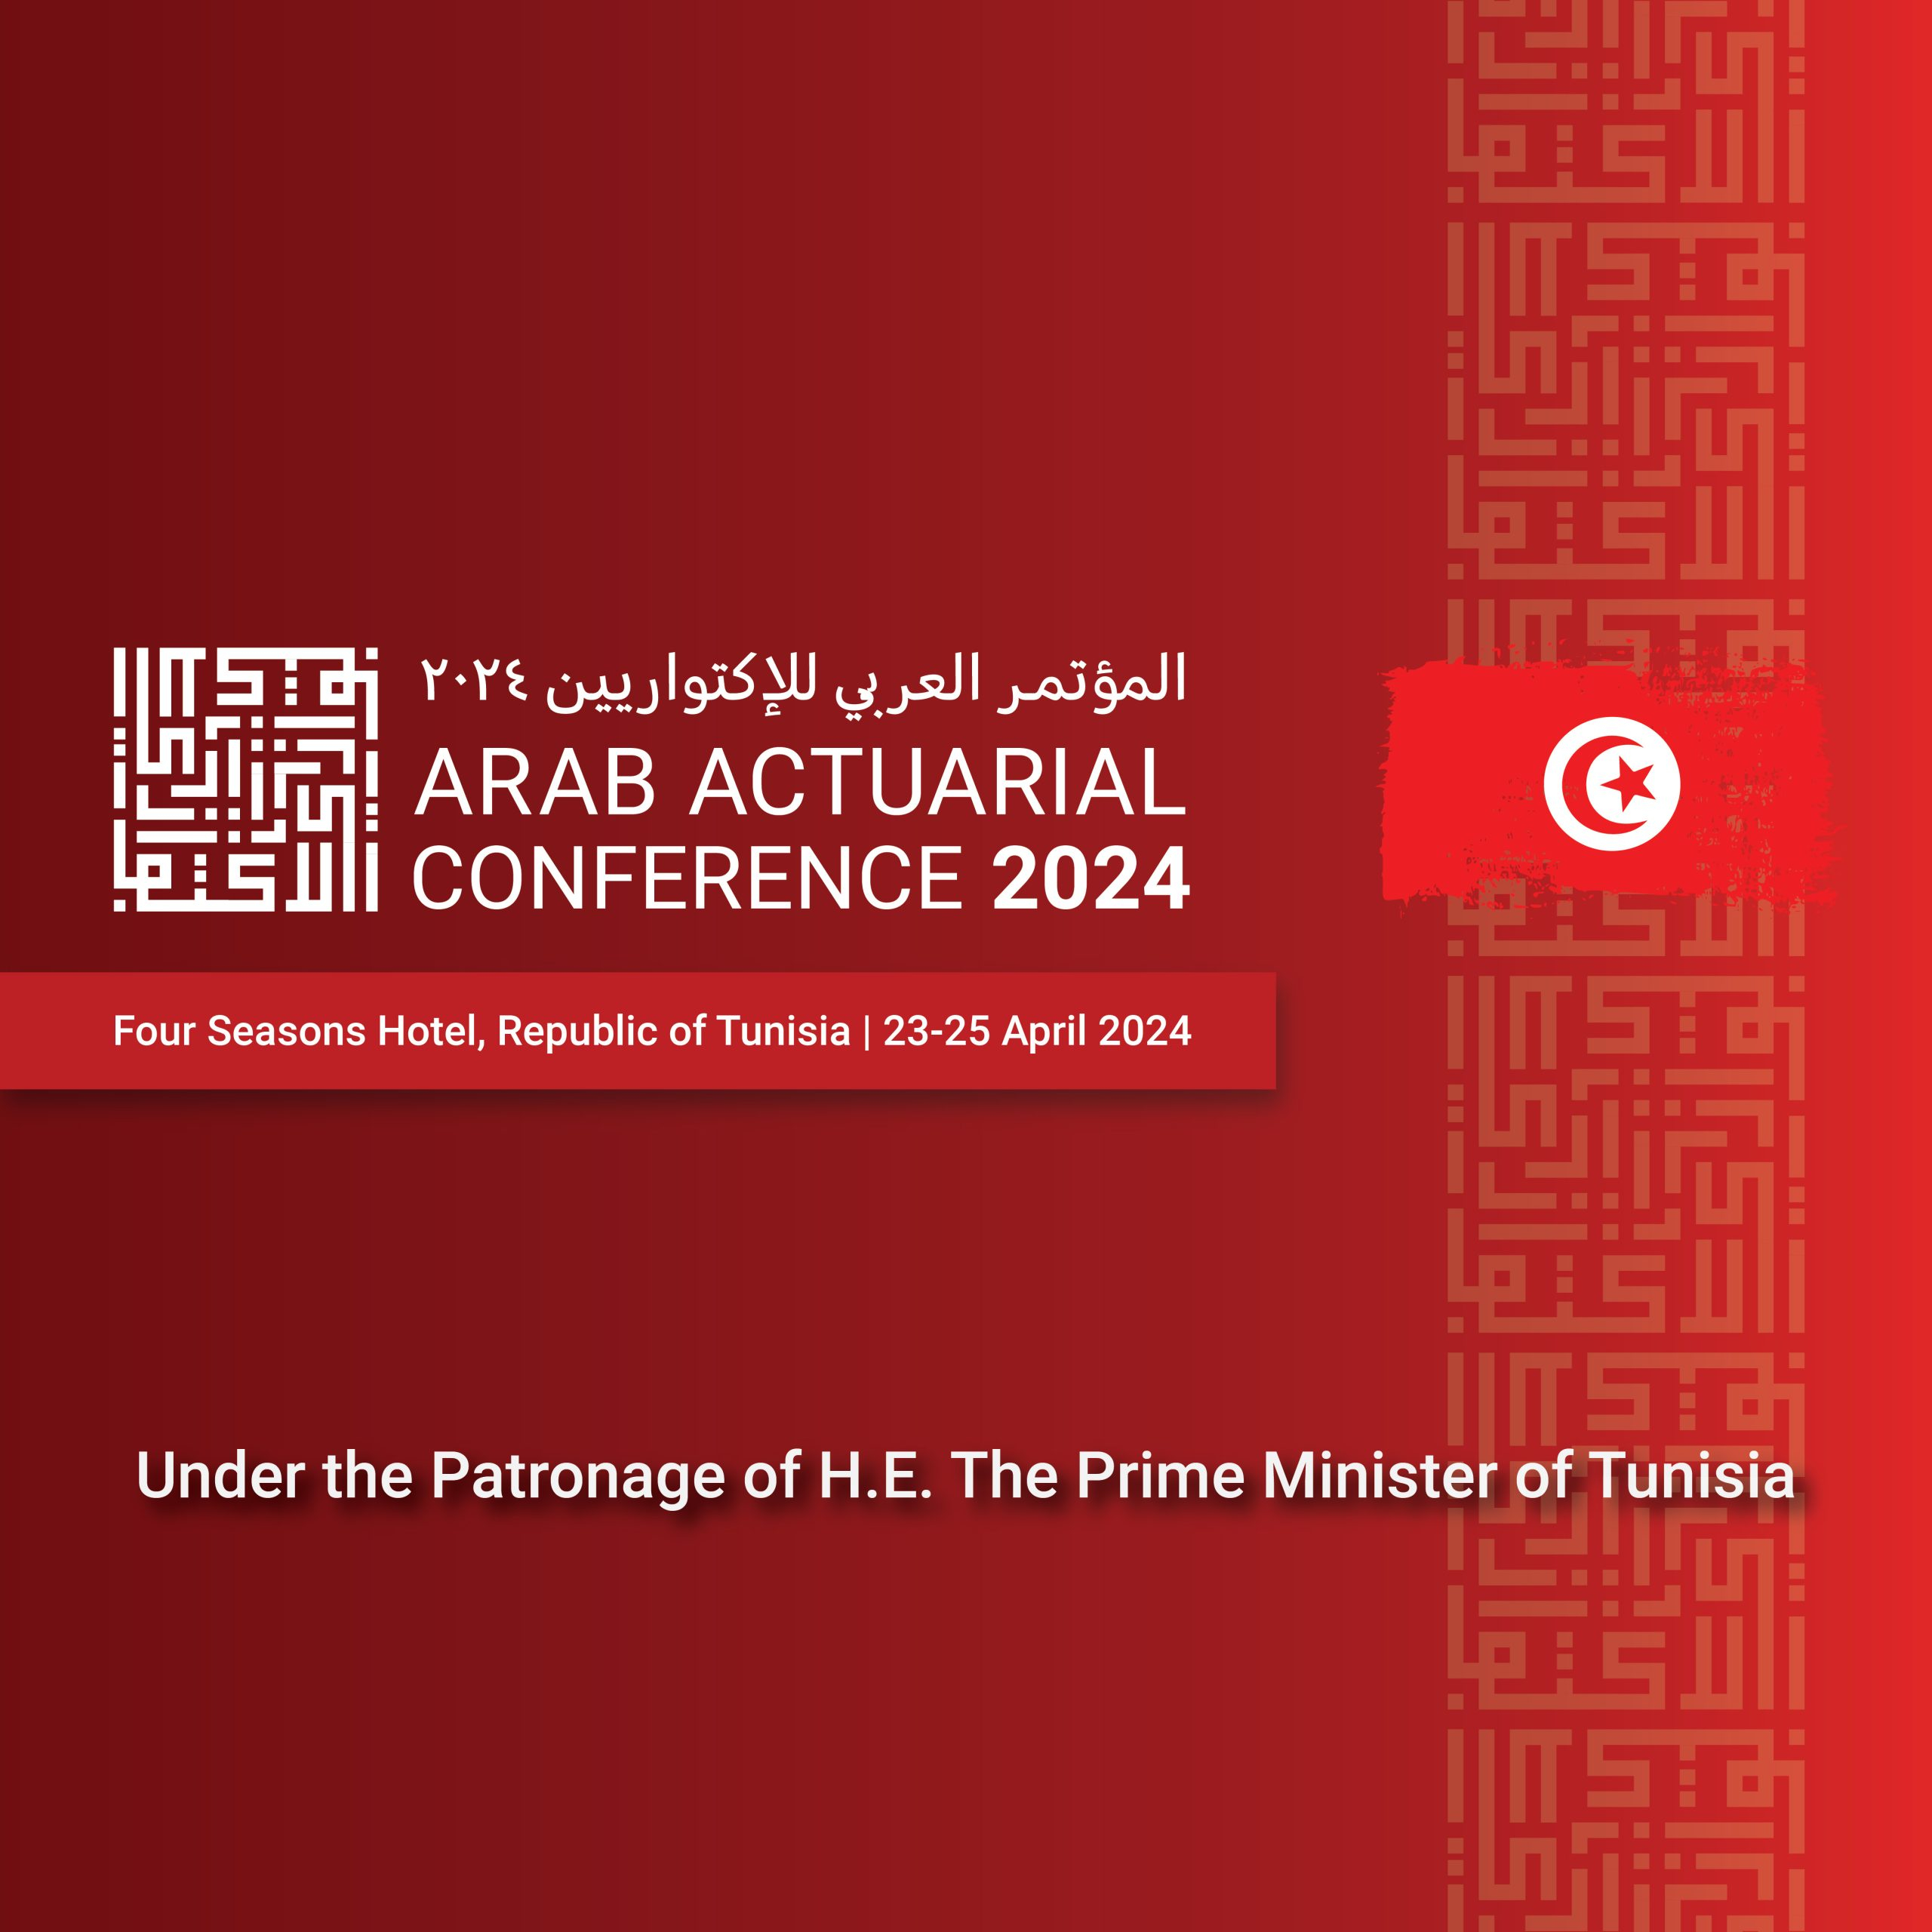 Arab Actuarial Conference 2024 – Fintech Robos intended for Time And Attendance Conference 2024